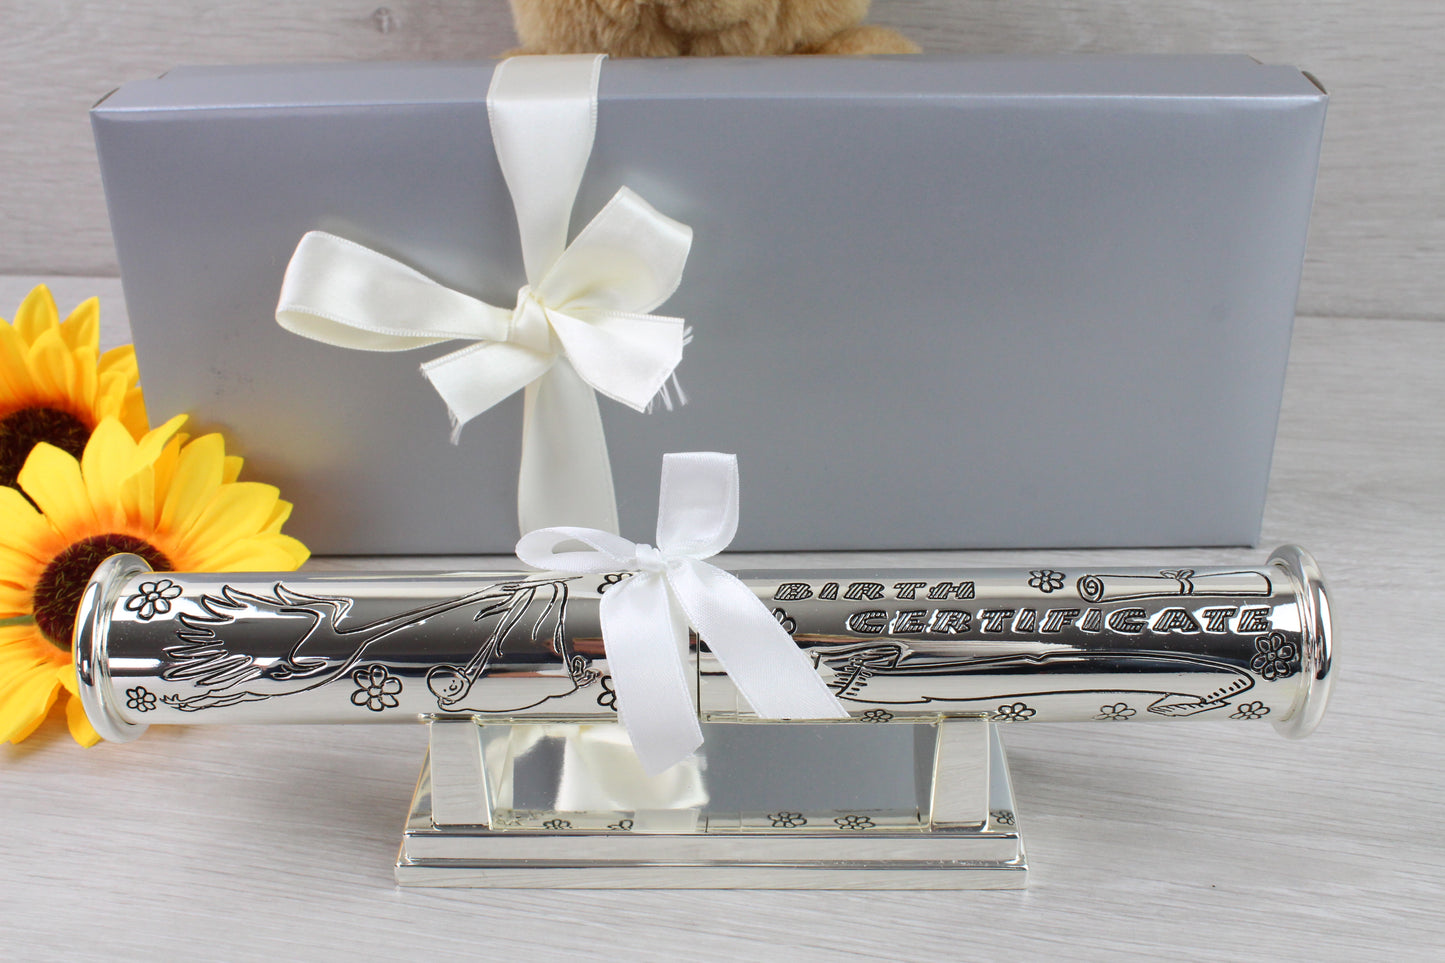 Engraved Personalised Birth Certificate Holder with Stand - Silver Plated finished with ivory ribbon and complemented with attractive, satin lined gift box. and 2 sunflower as props.